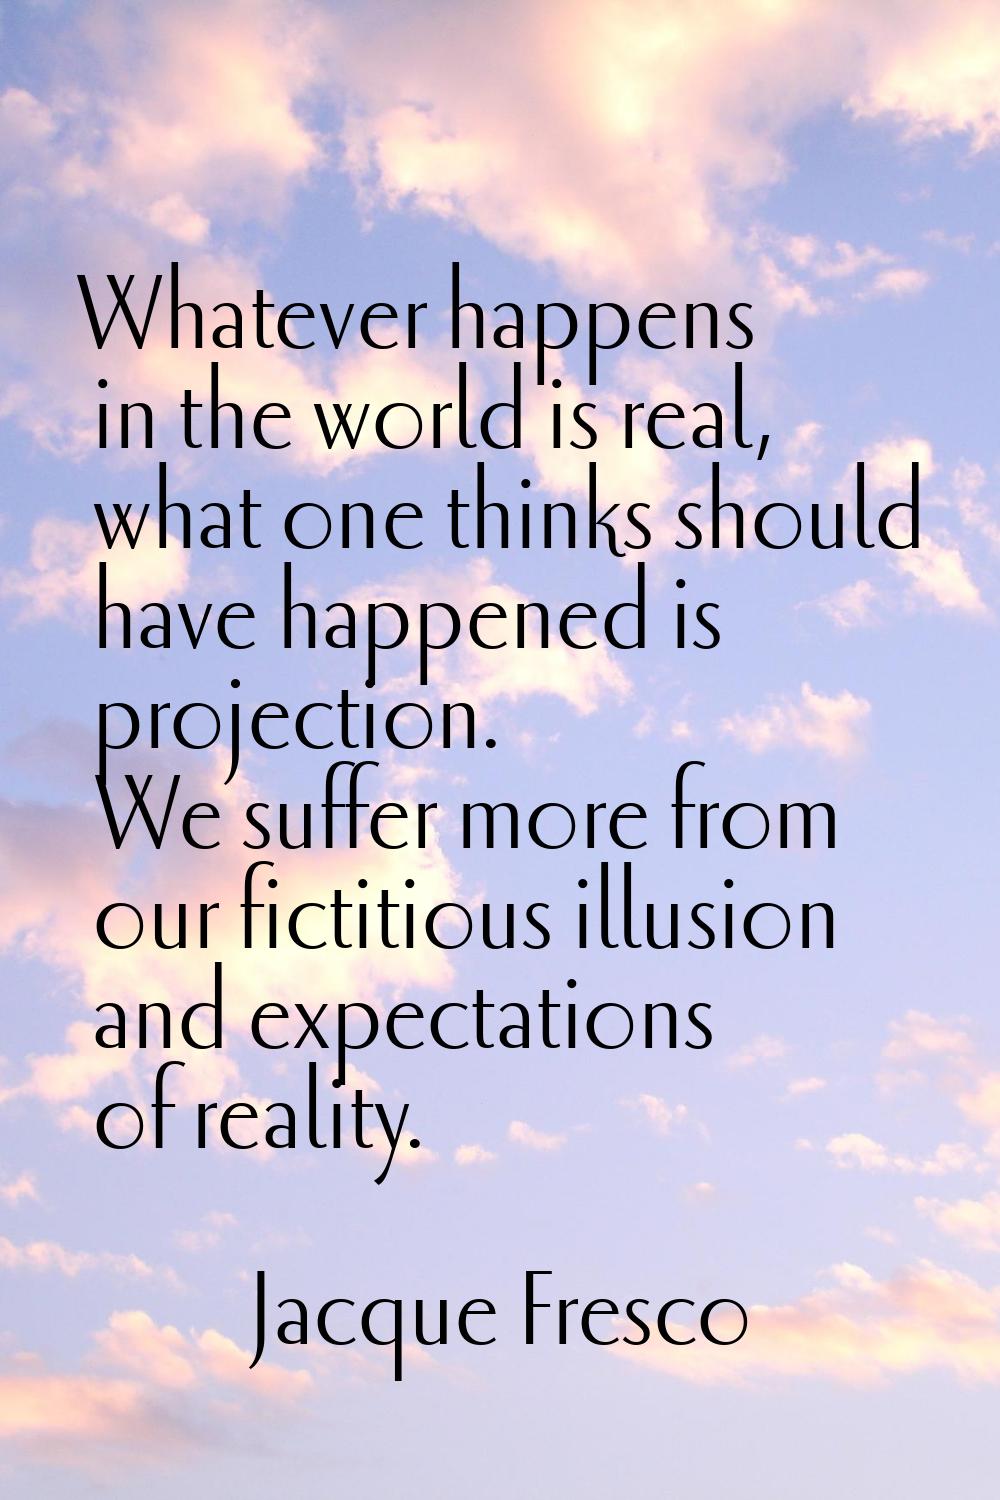 Whatever happens in the world is real, what one thinks should have happened is projection. We suffe